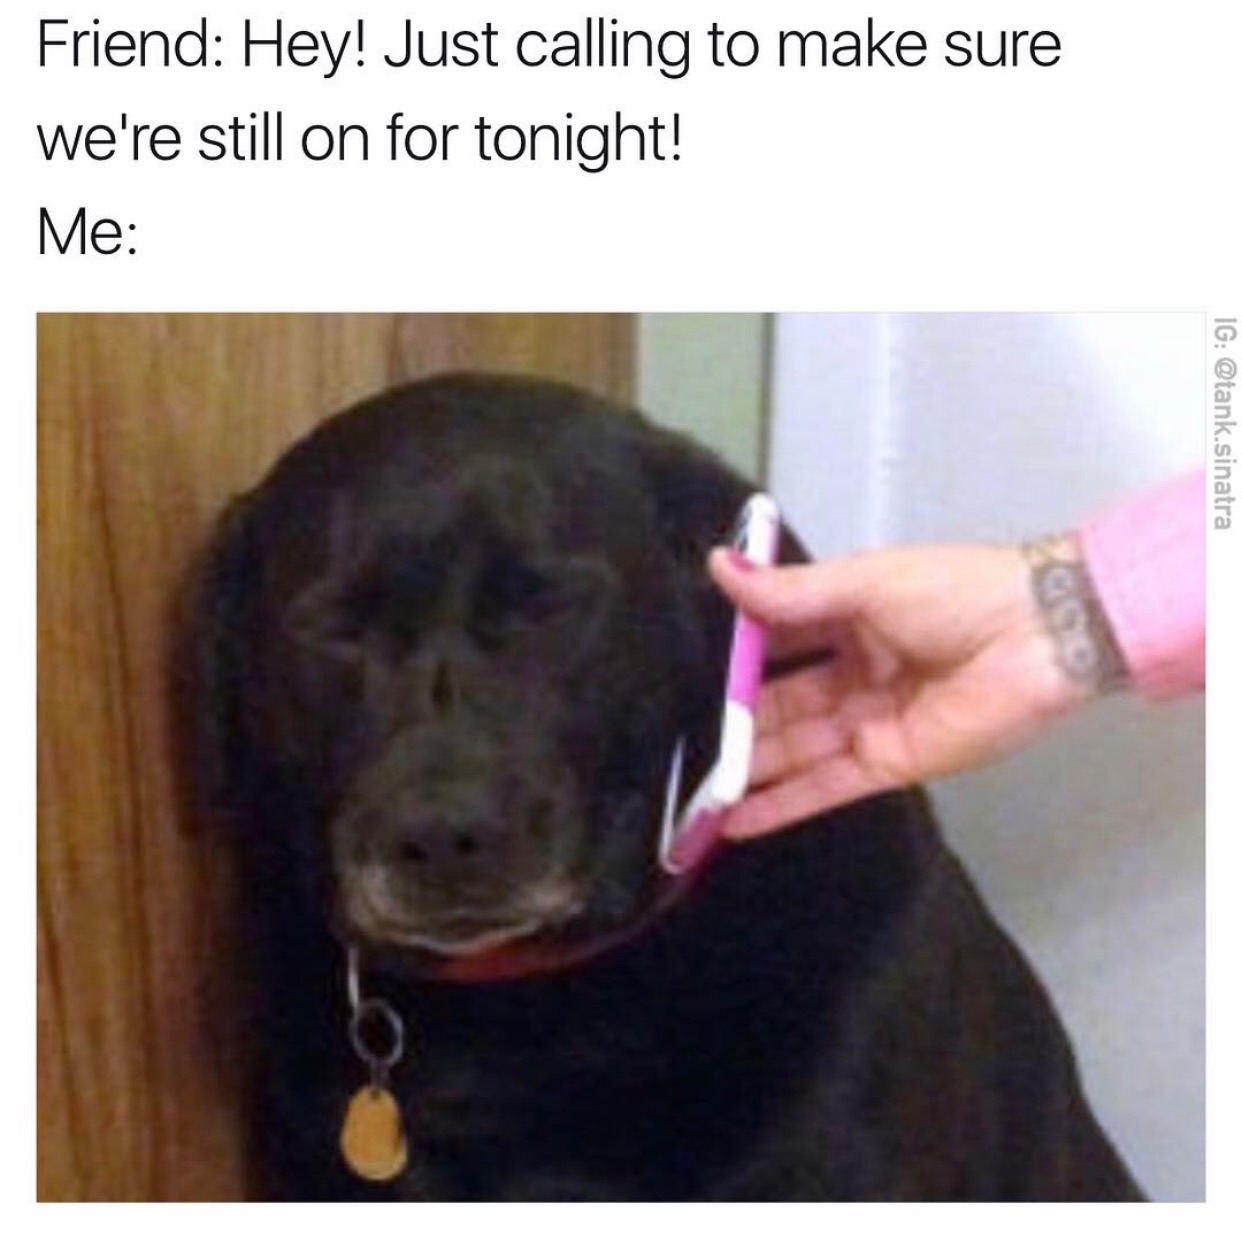 adulting memes - Friend Hey! Just calling to make sure we're still on for tonight! Me Ig .sinatra